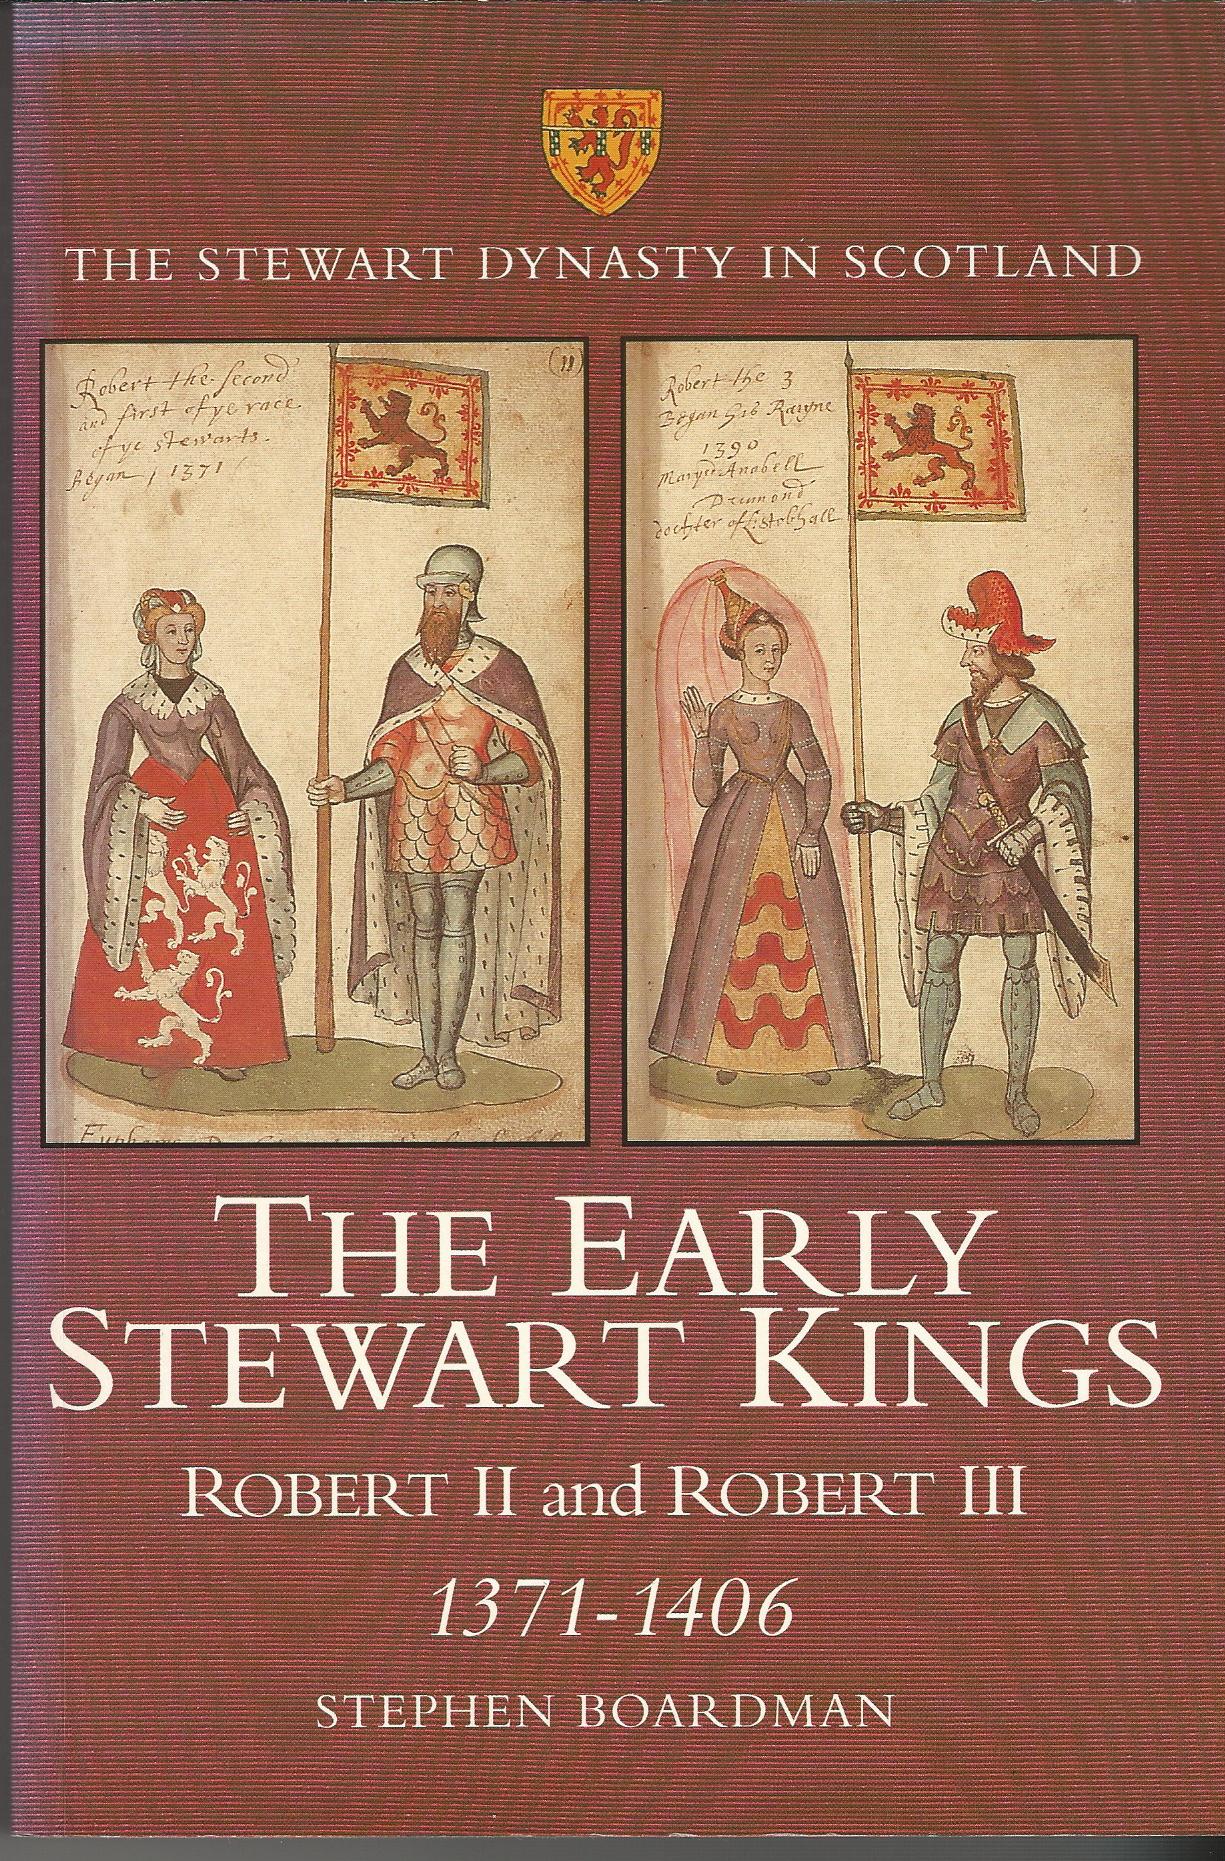 Image for The Early Stewart Kings: Robert II and Robert III 1371-1406 (The Stewart Dynasty in Scotland series)